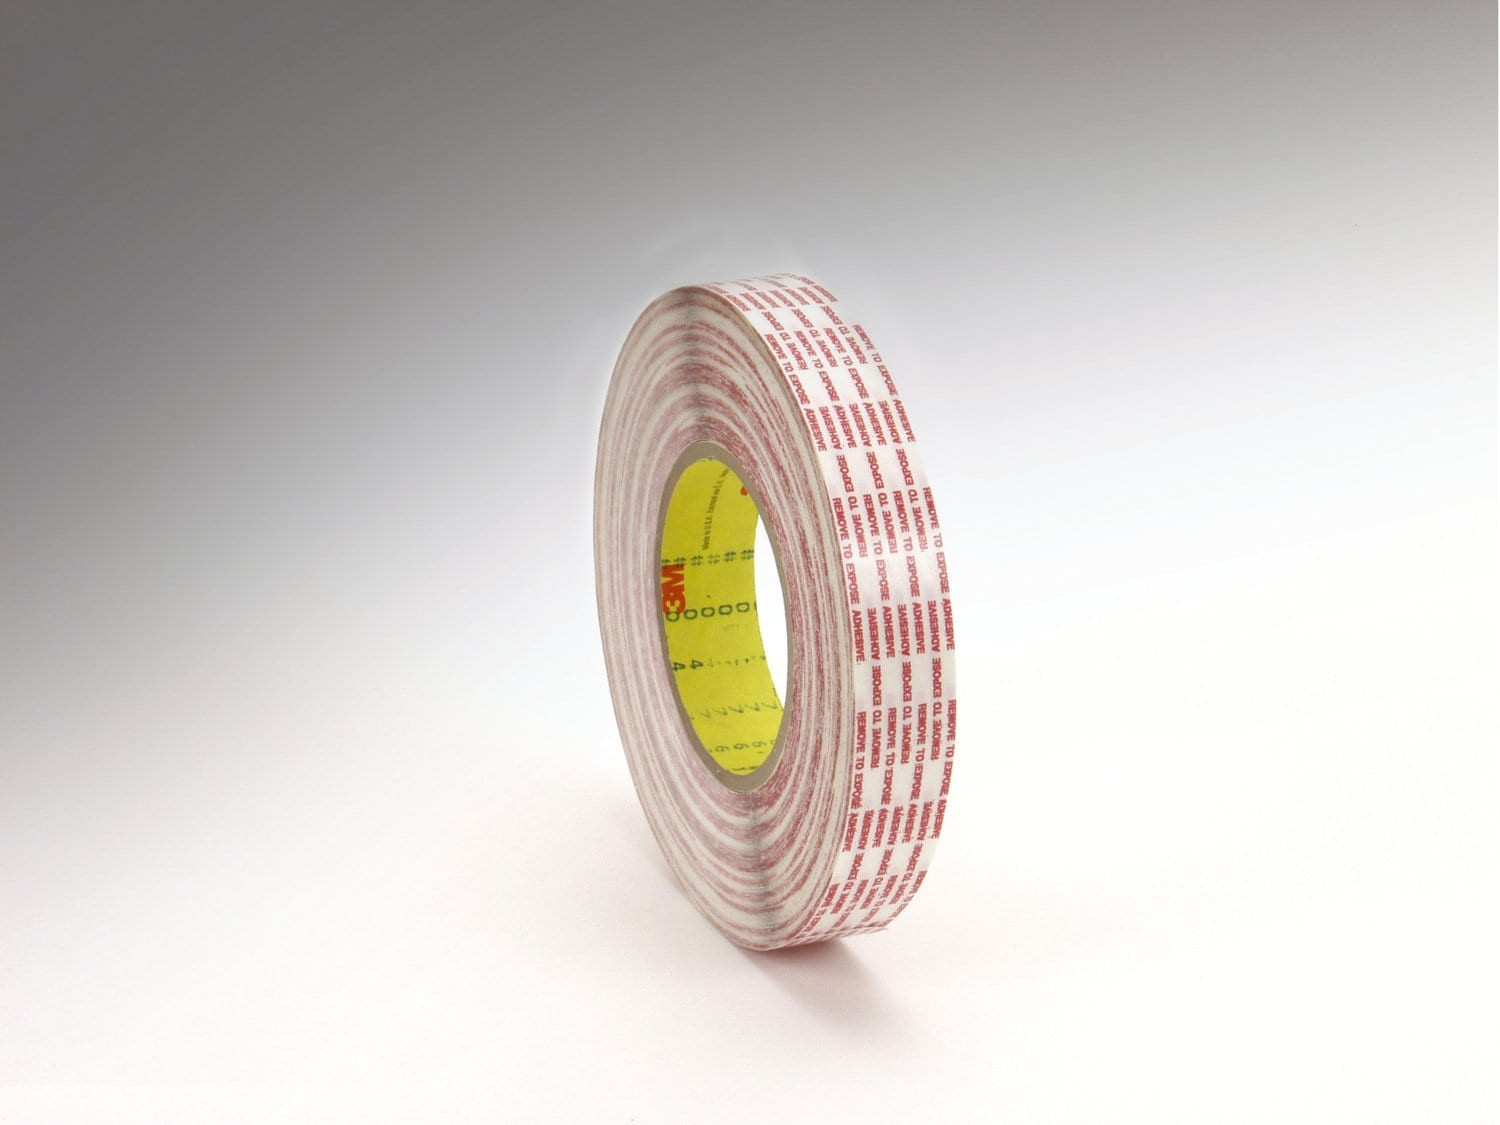 7010334473 - 3M Double Coated Tape Extended Liner 476XL, Translucent, 3/4 in x 60
yd, 6 mil, 48 rolls per case